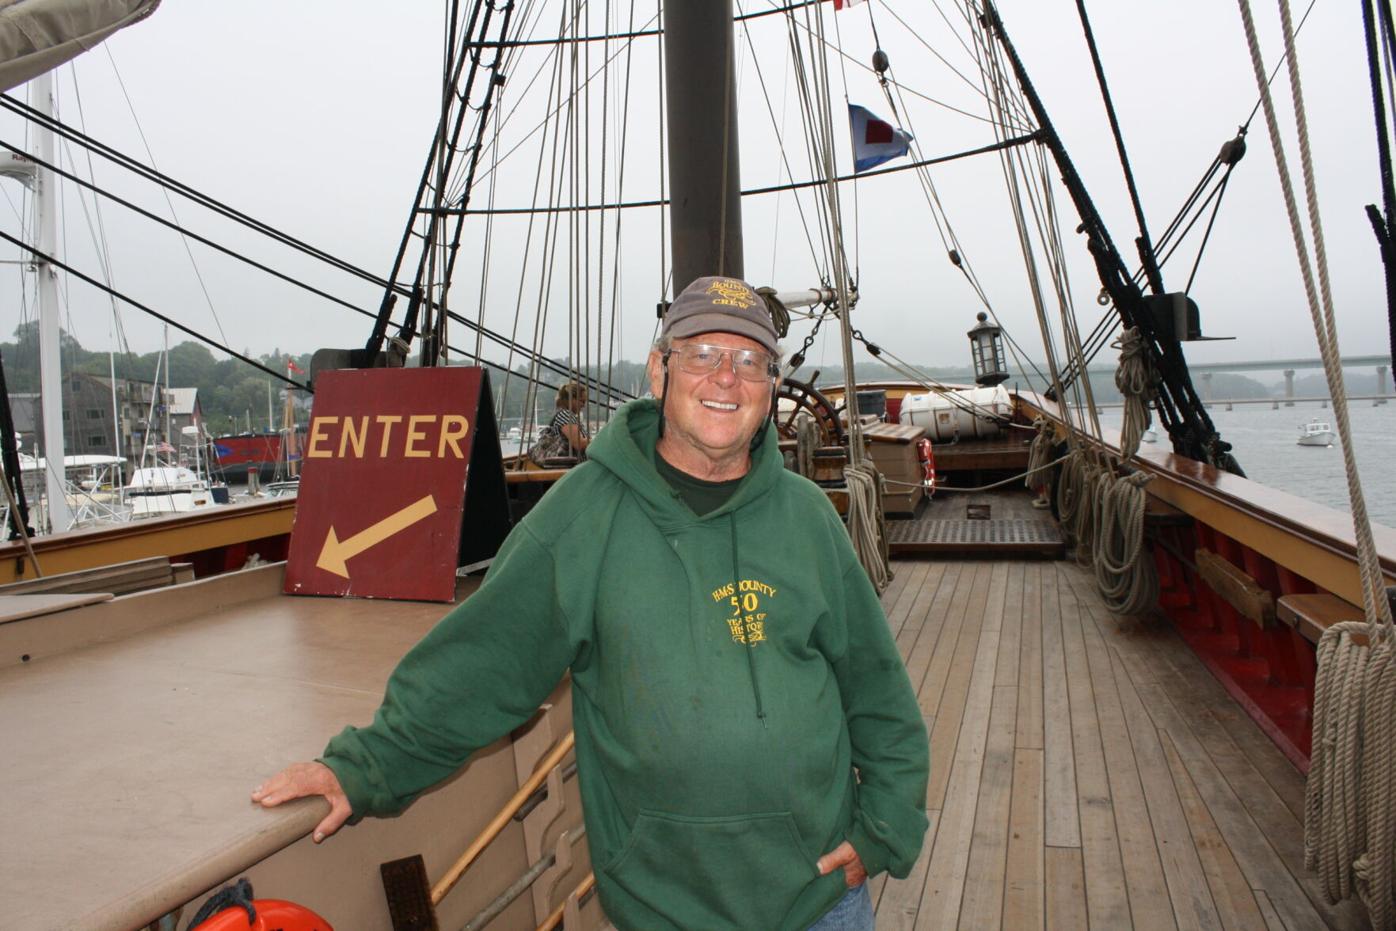 HMS Bounty captain discusses life aboard storied ship, News